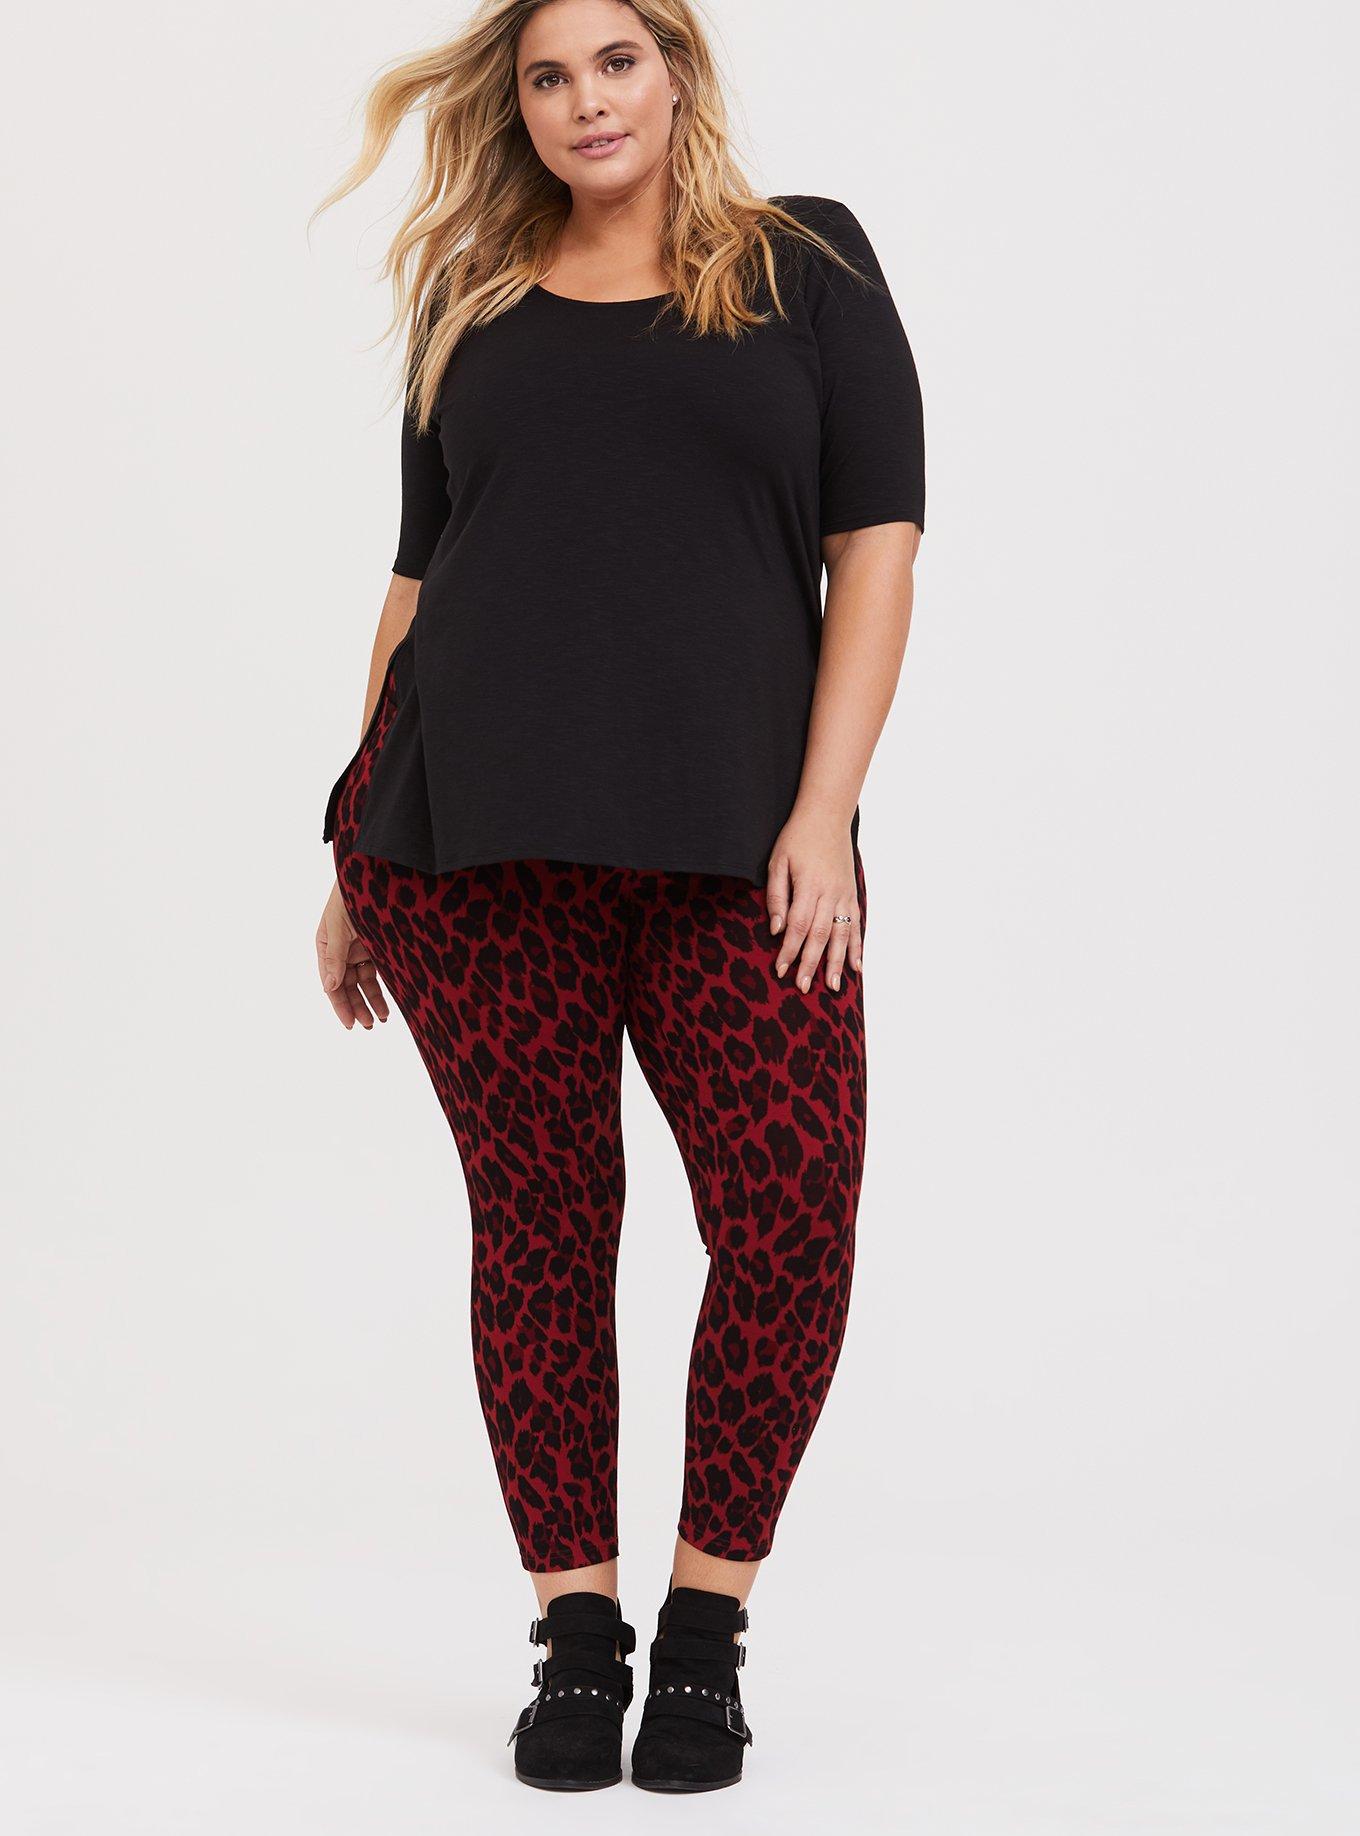 Plus Size - Ponte Stretch Ankle Skinny Pant - Red Leopard - Torrid